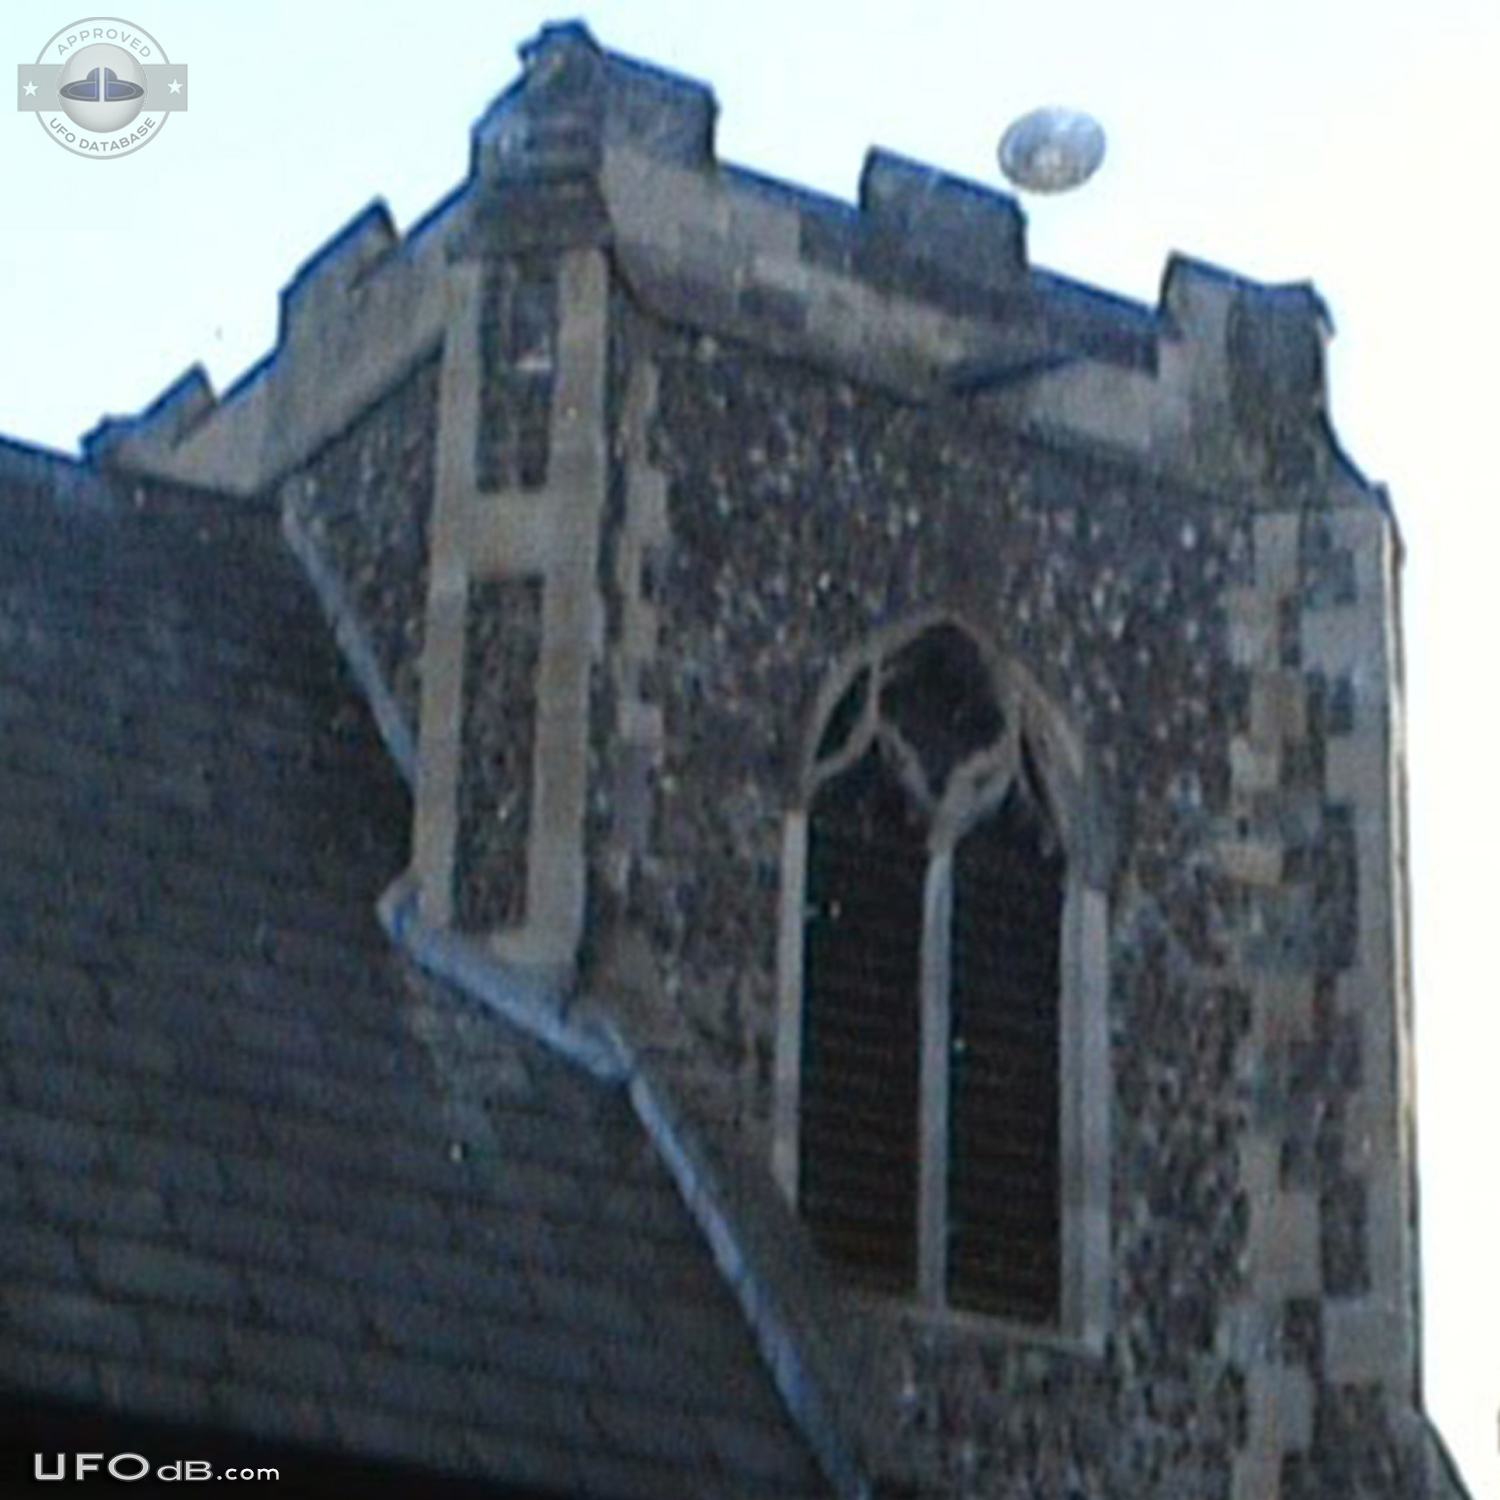 Saucer UFO seen right over Church in Norwich, Norfolk UK 2005 UFO Picture #587-2